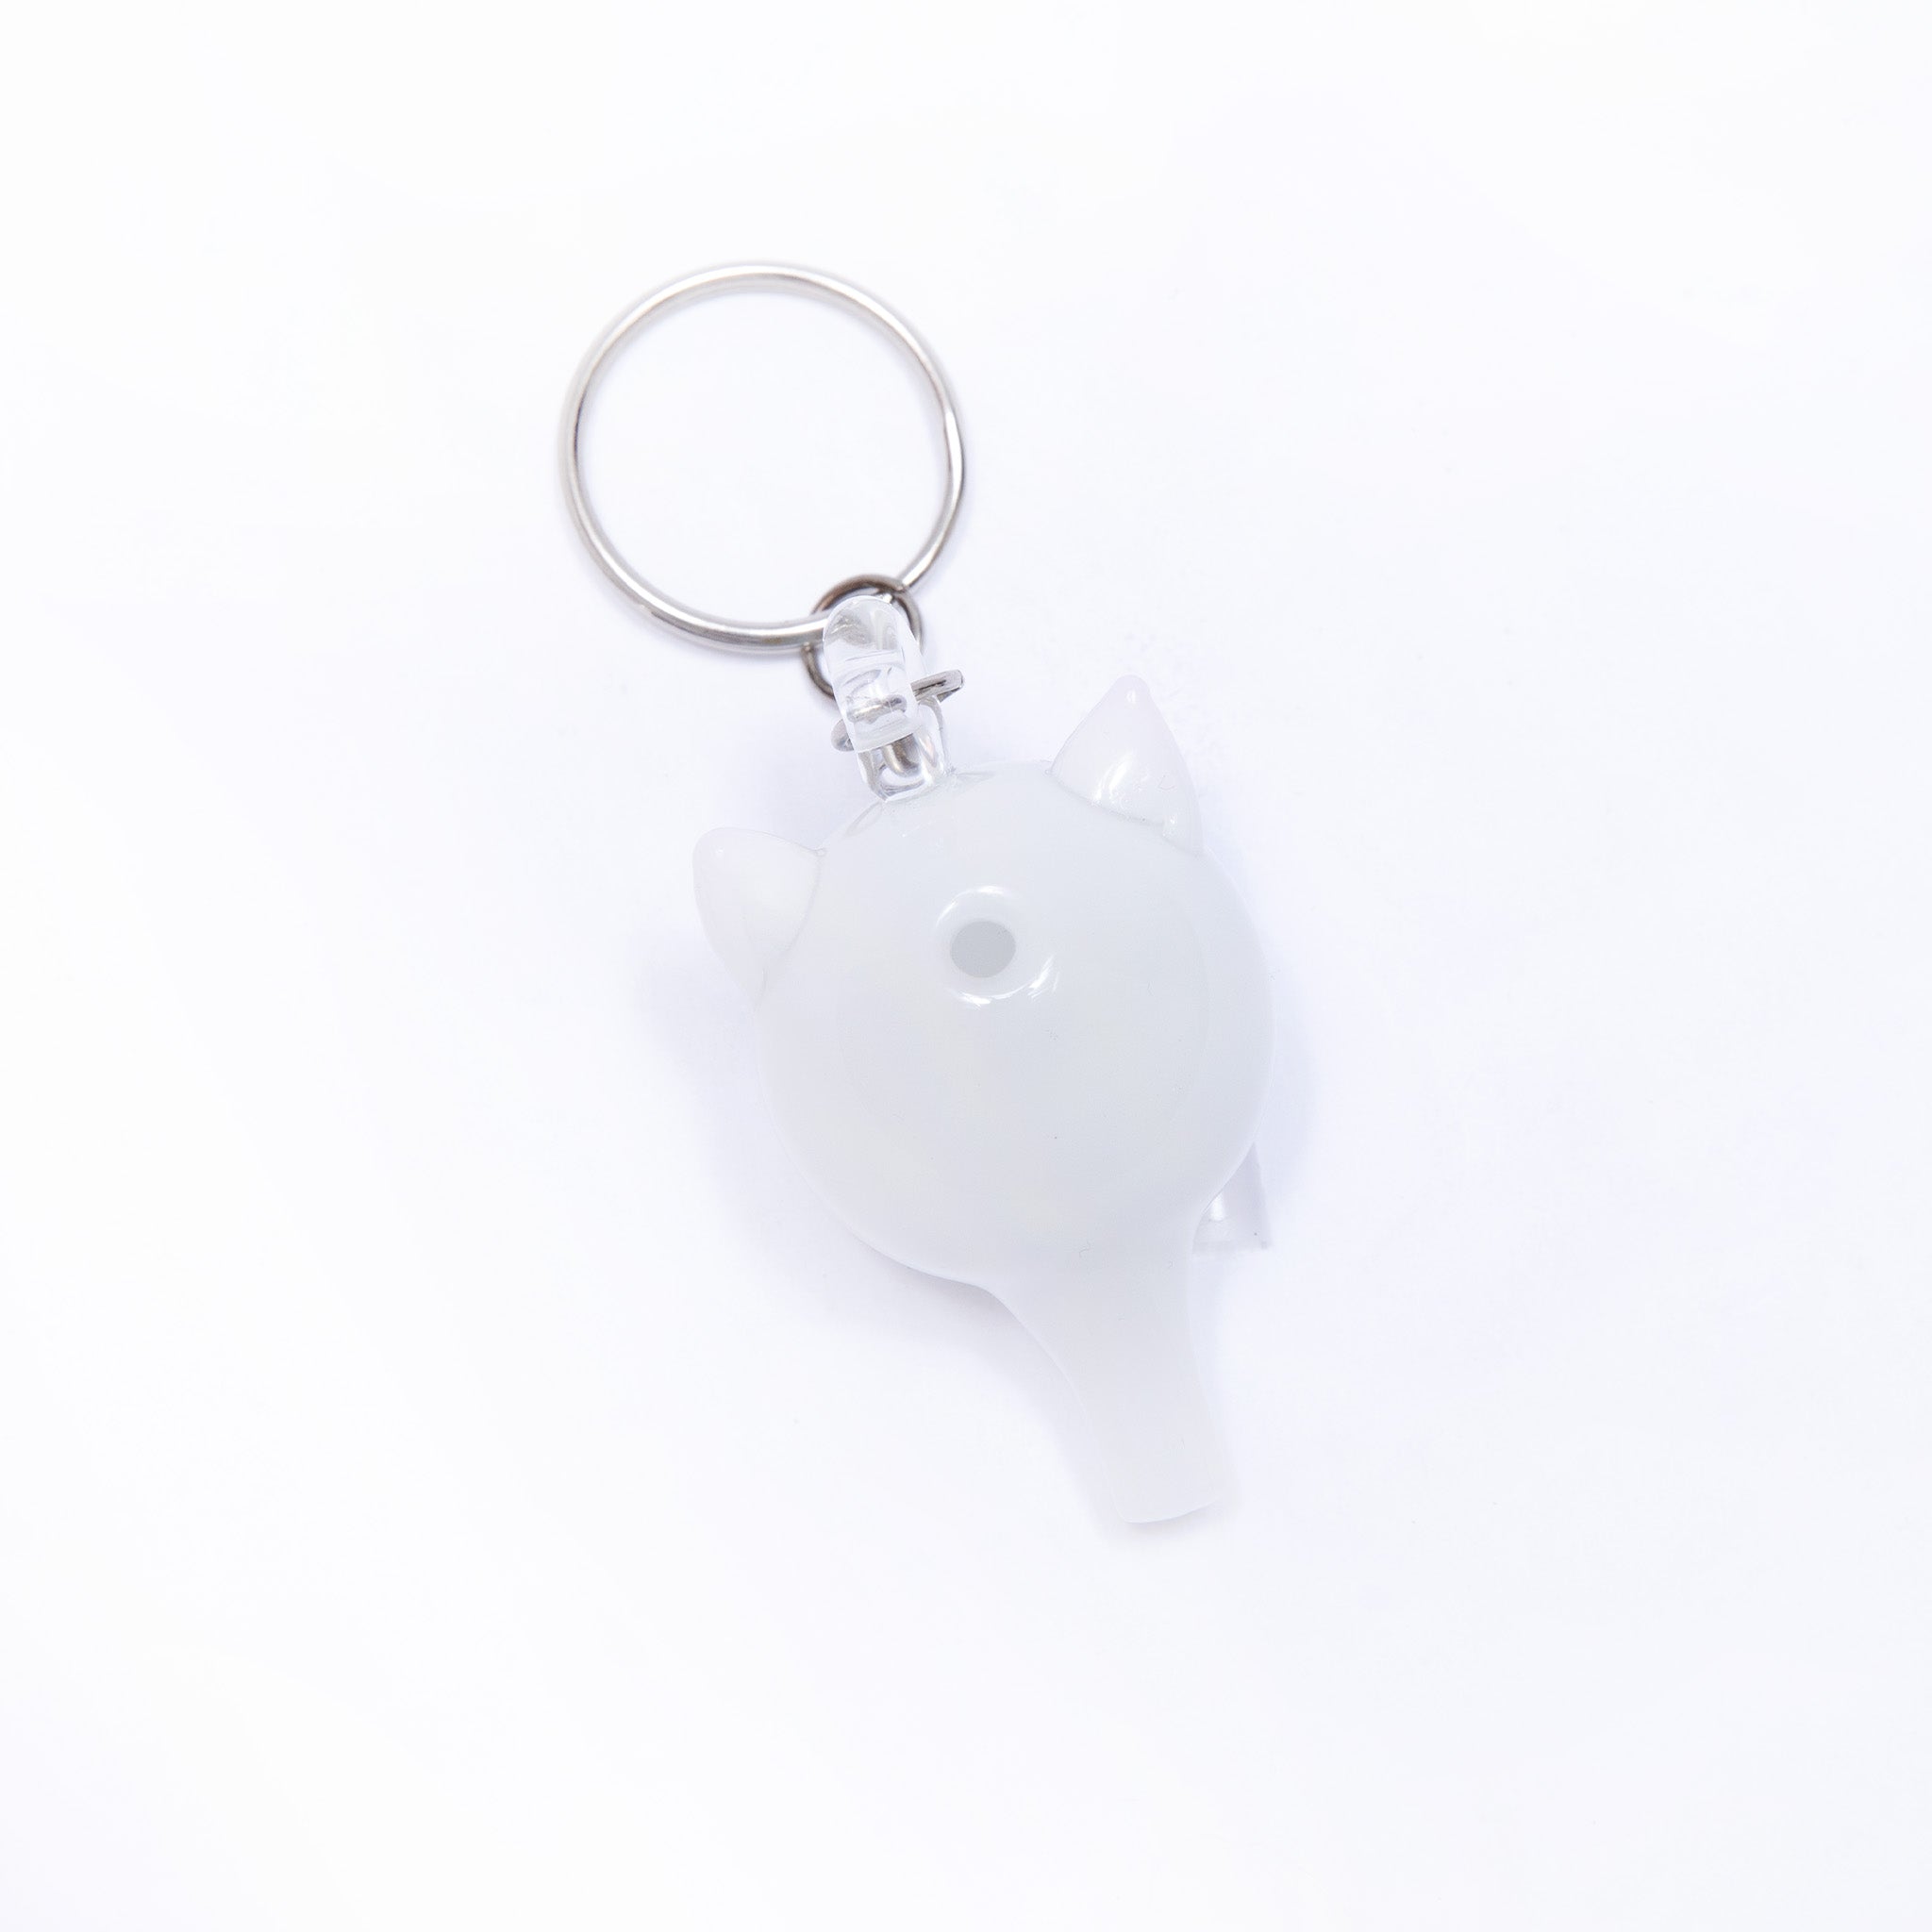 Lord Nermal Glass Carb Cap Keychain (White)